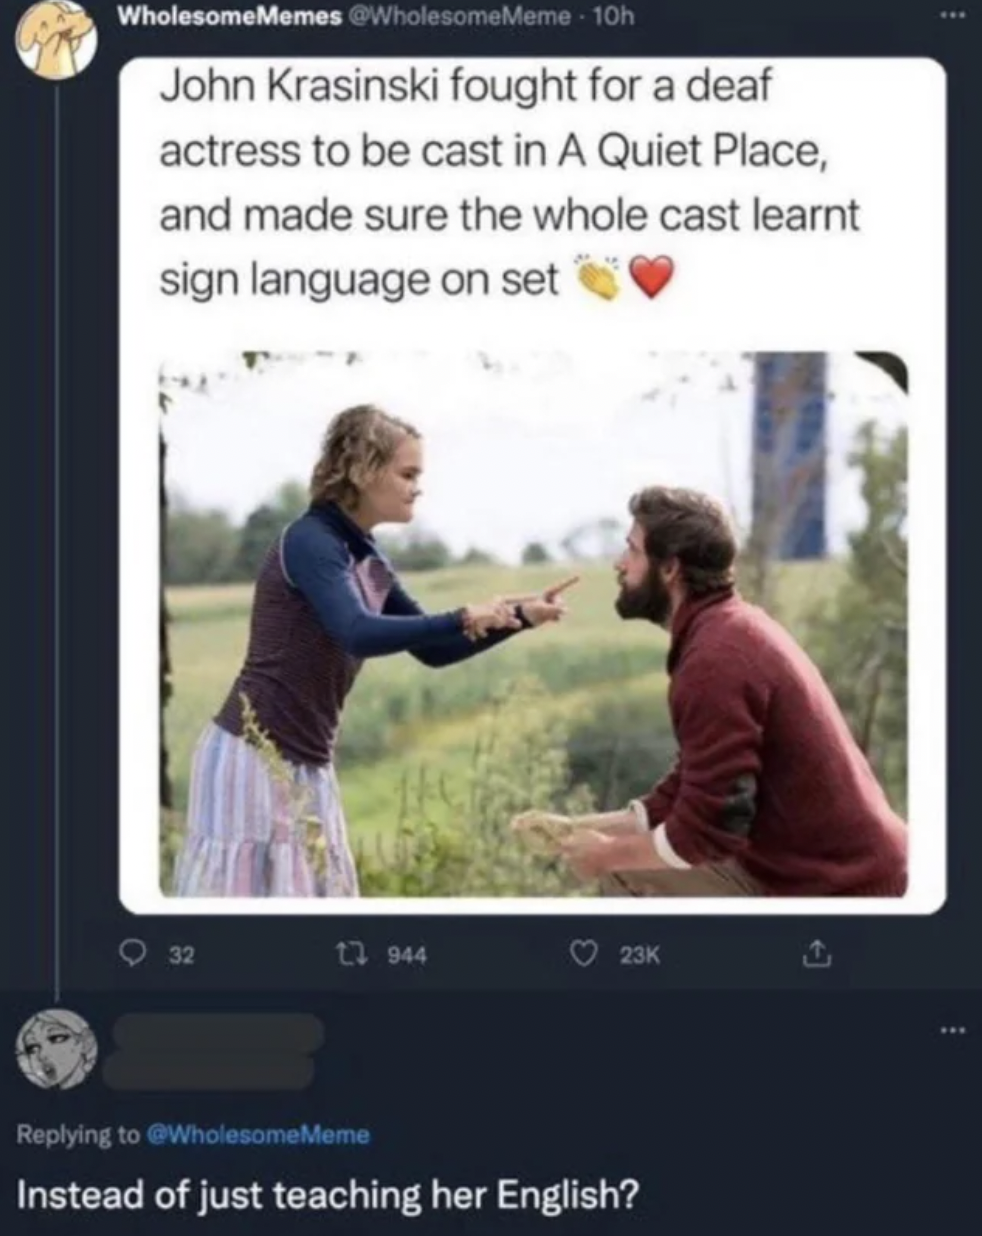 quiet place outfits - WholesomeMemes 10h John Krasinski fought for a deaf actress to be cast in A Quiet Place, and made sure the whole cast learnt sign language on set 13 Instead of just teaching her English? 1